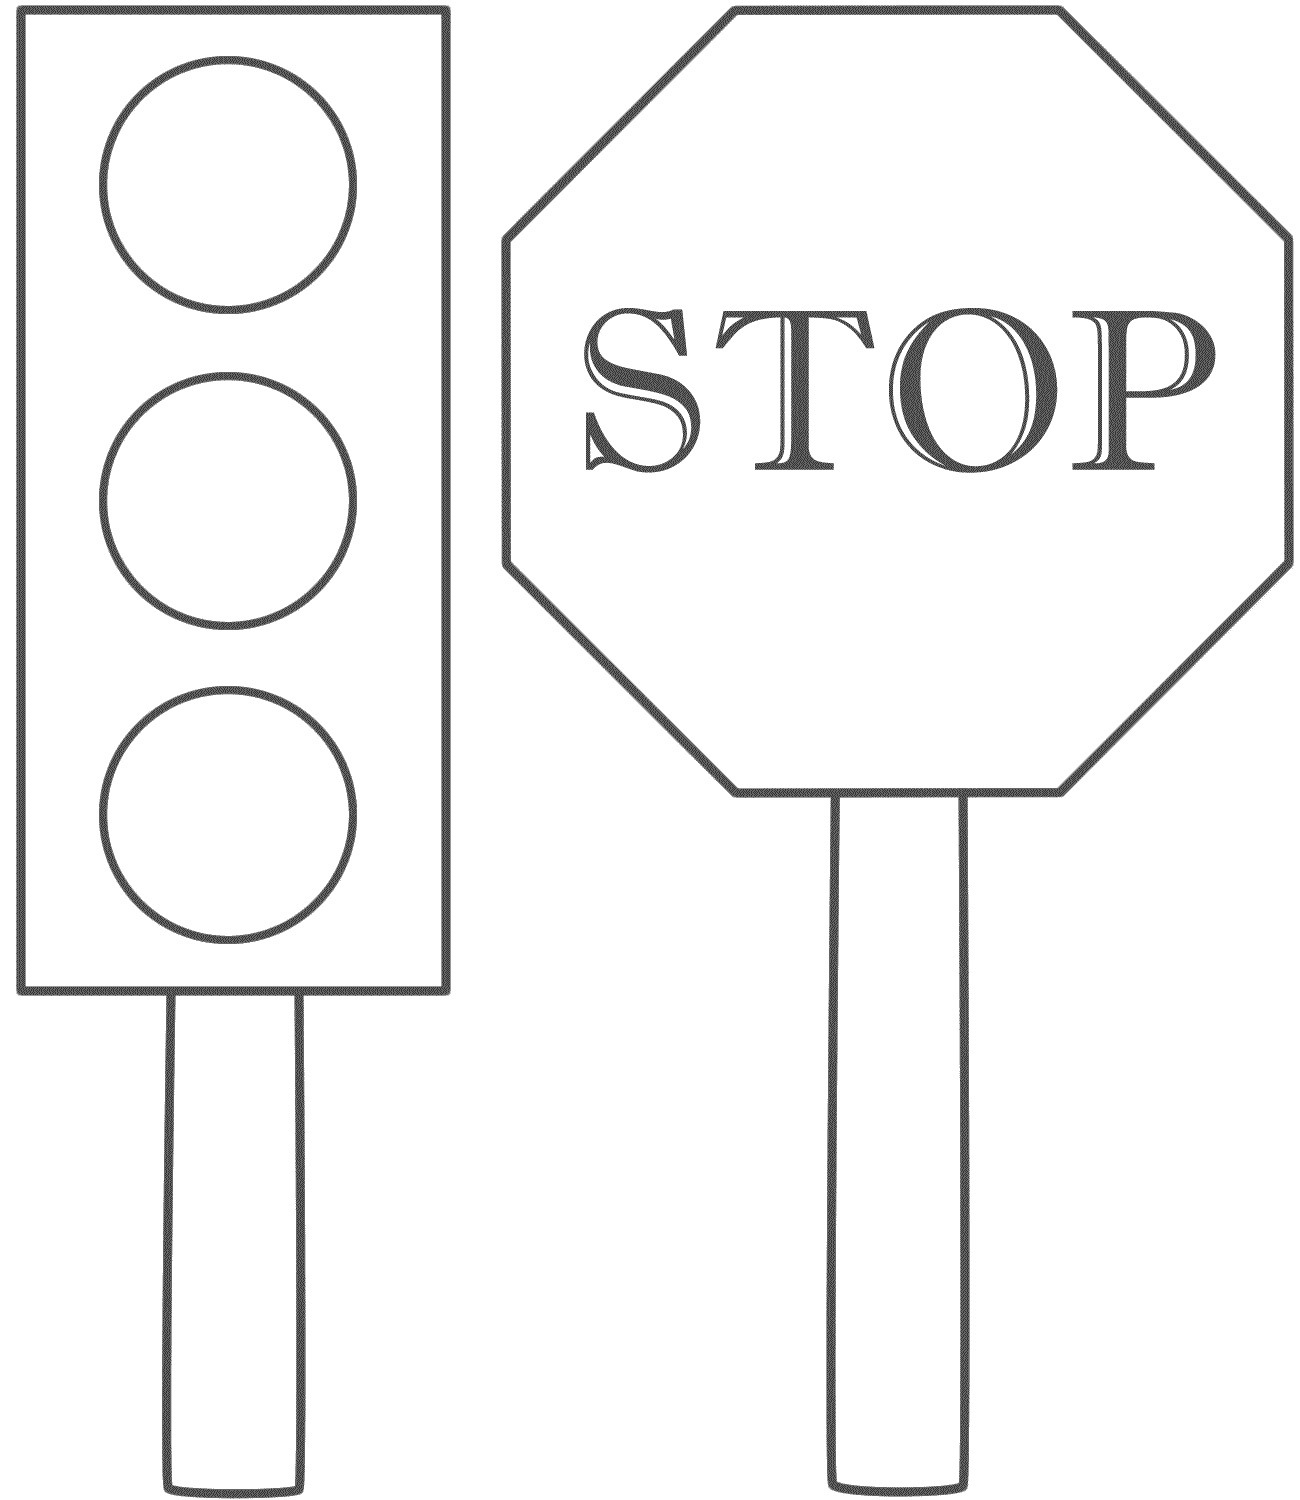 Traffic Light and Stop Sign - Coloring Page (Safety)